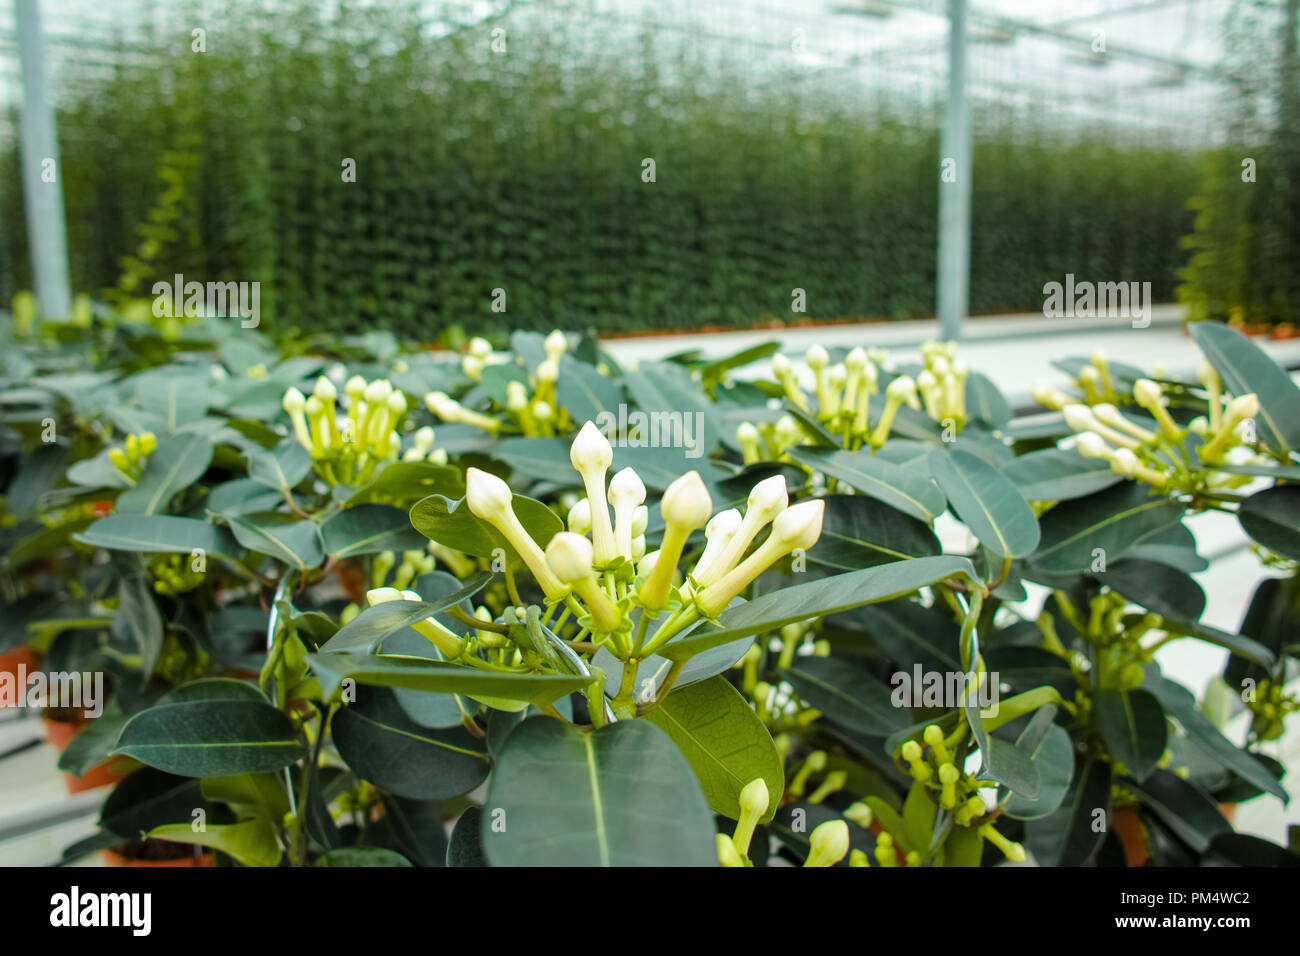 Stephanotis plant or Madagascar jasmine, cultivated as decorative or ornamental flower, popular element in wedding bouquets, growing in greenhouse Stock Photo